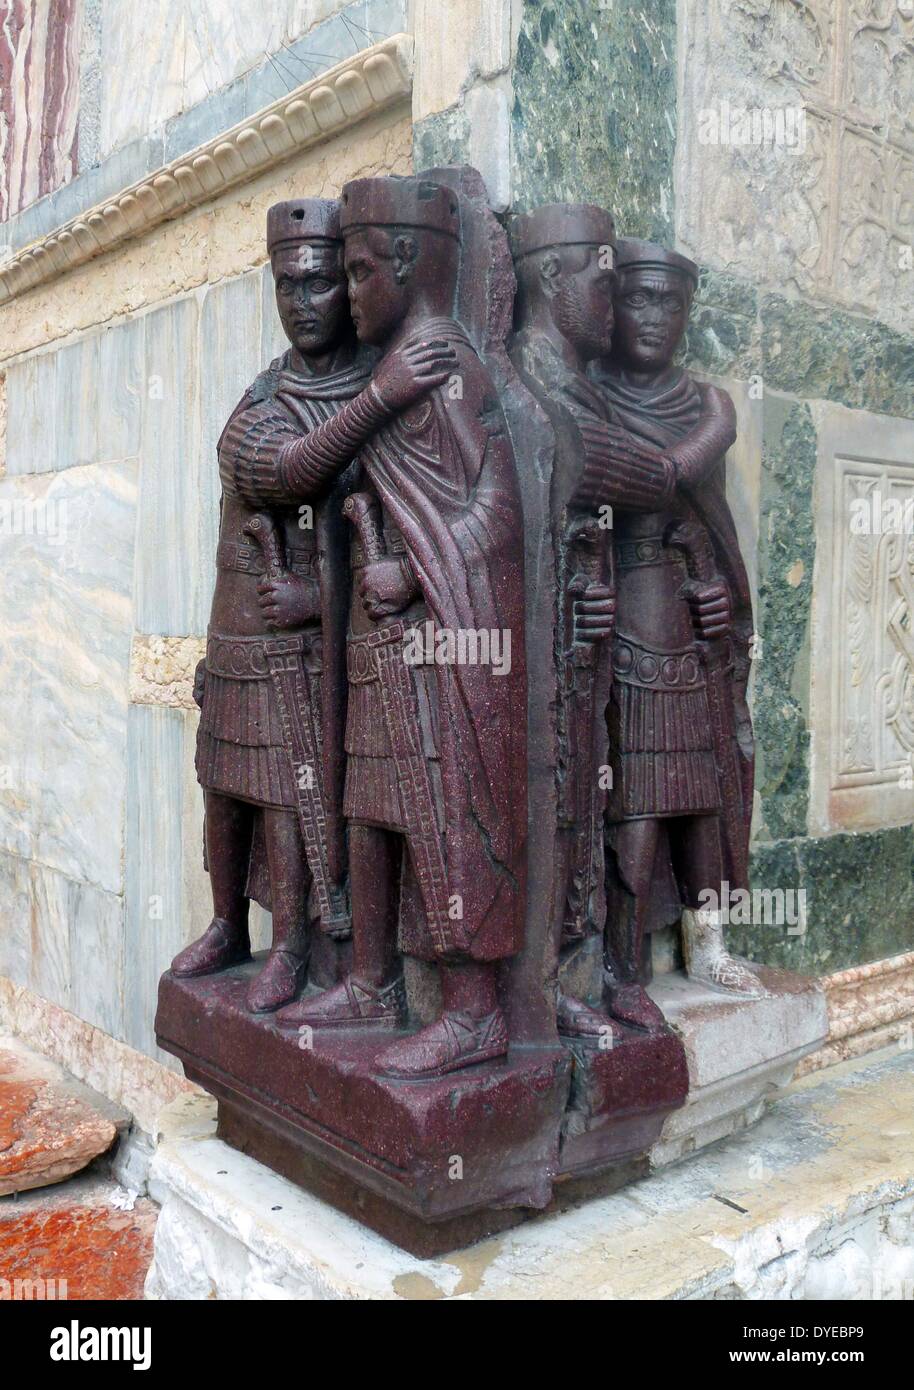 The Portrait of the Four Tetrarchs. A Porphyry sculpture group of four Roman emperors dating from around 300 AD. Fixed to a corner façade of St Mark's Basilica in Venice in the Middle Ages. Venice. Italy 2013 Stock Photo